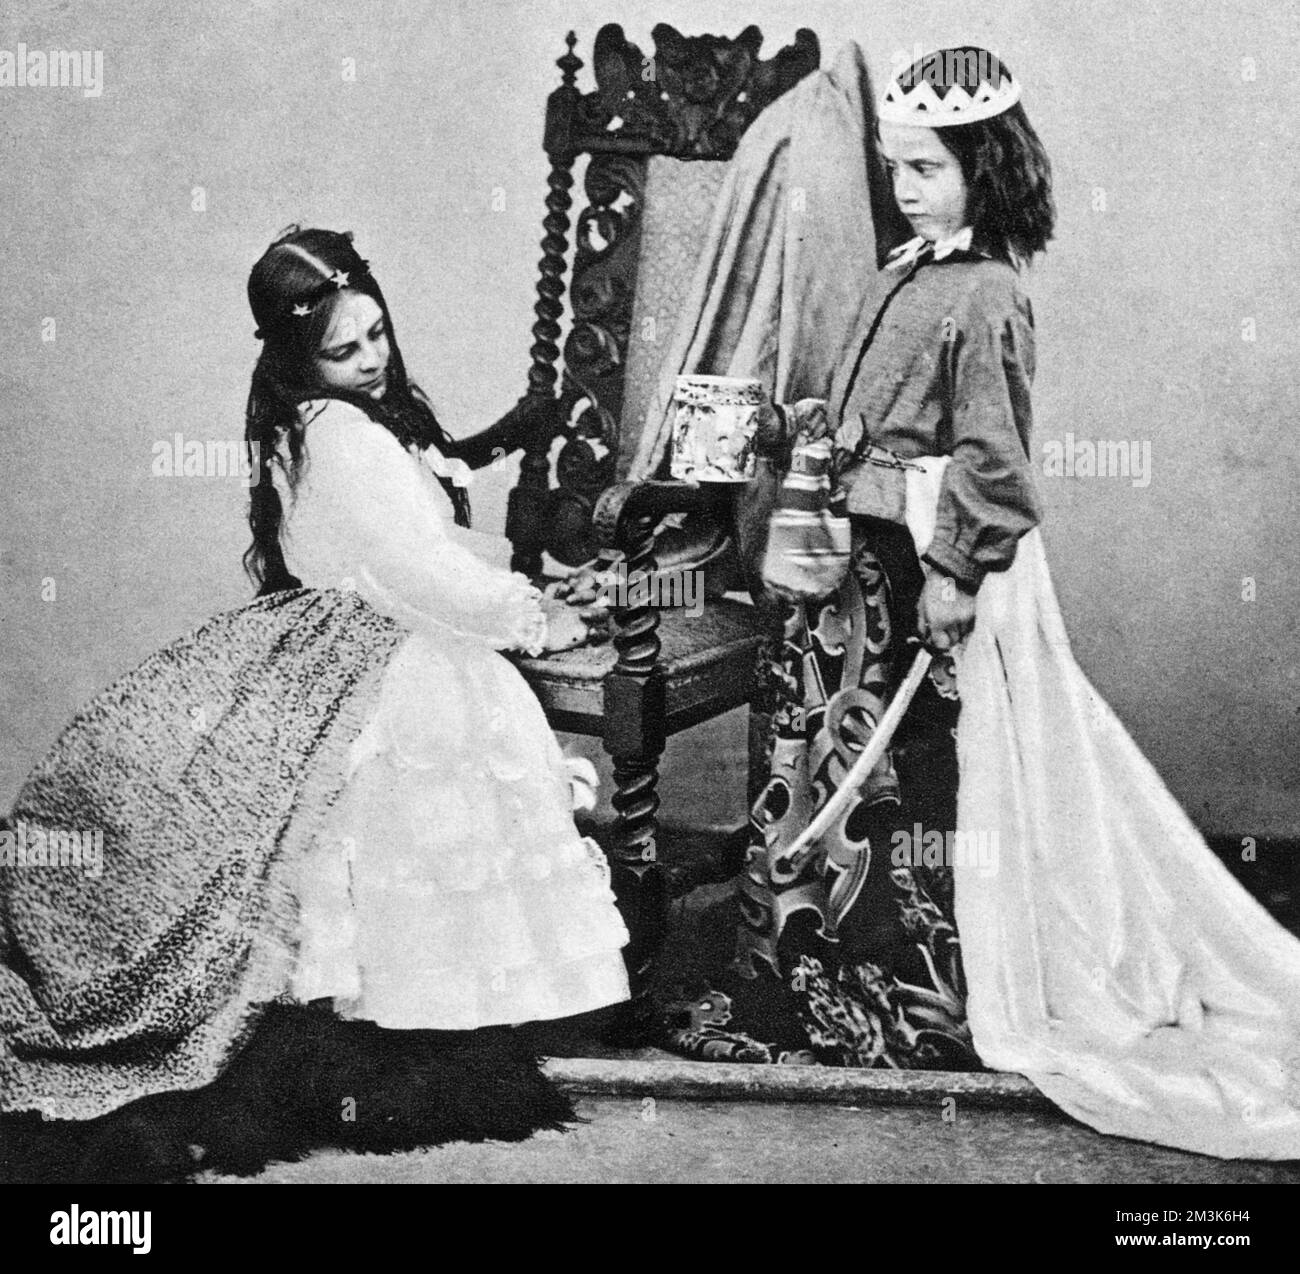 Lewis Carroll (Rev. Charles L. Dodgson) of 'Fair Rosamond', a fancy dress group, at Oxford in June 1863.   The children shown are Annie M. Rogers as 'Queen Eleanor' (on right) and Mary Jackson as 'Fair Rosamond'. Stock Photo